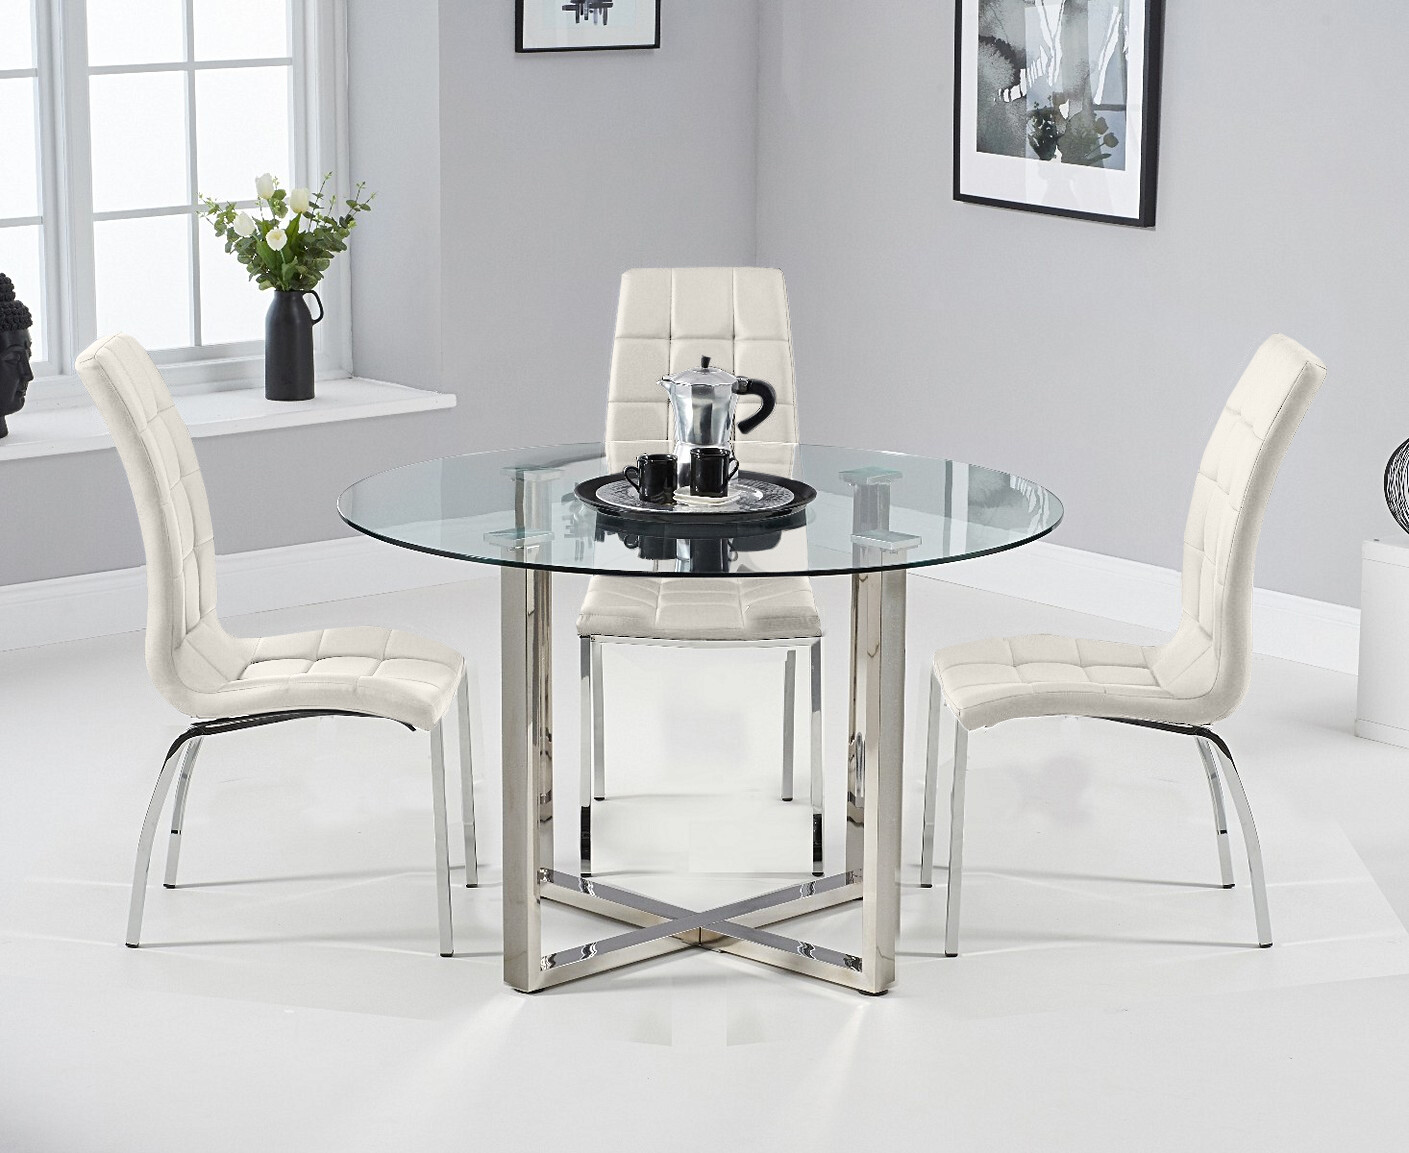 Photo 3 of Vaso 120cm round glass dining table with 4 white enzo chairs